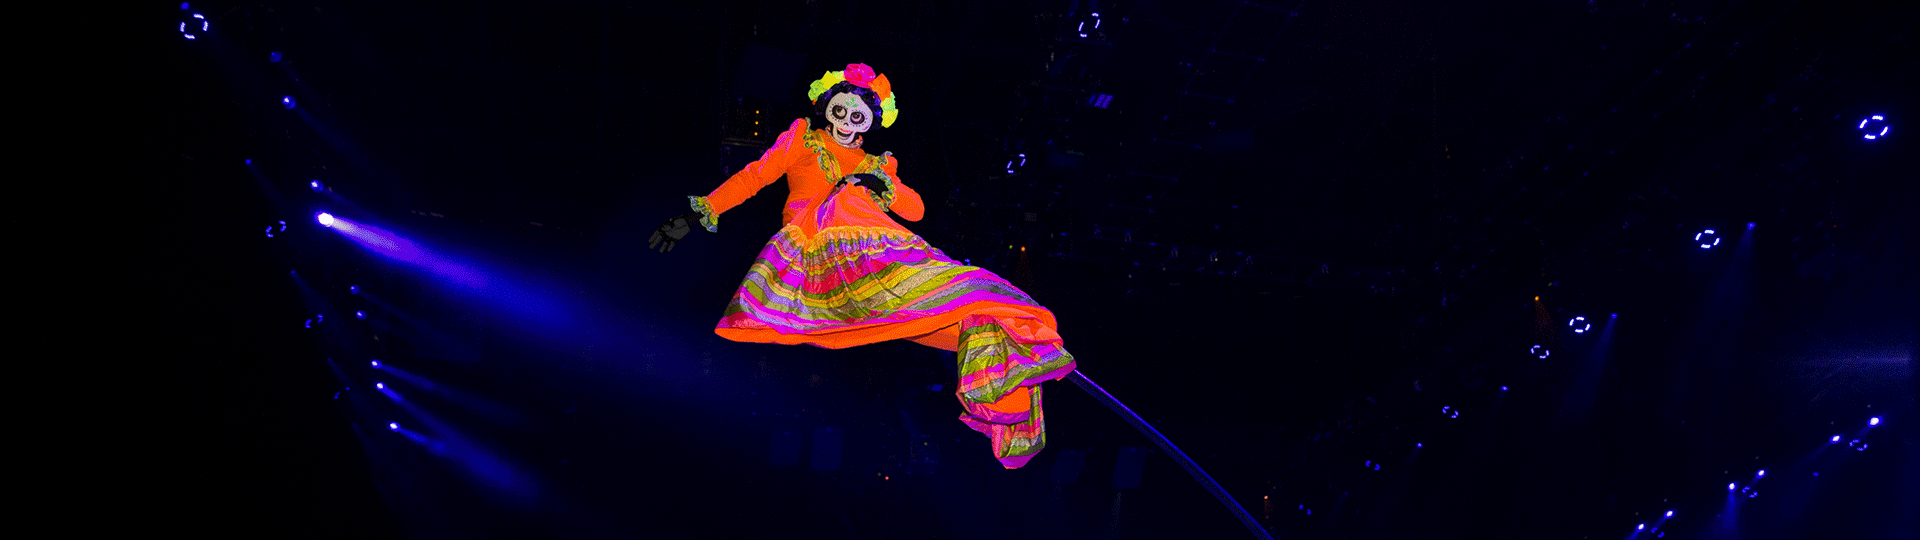 10 Disney On Ice WOW Moments